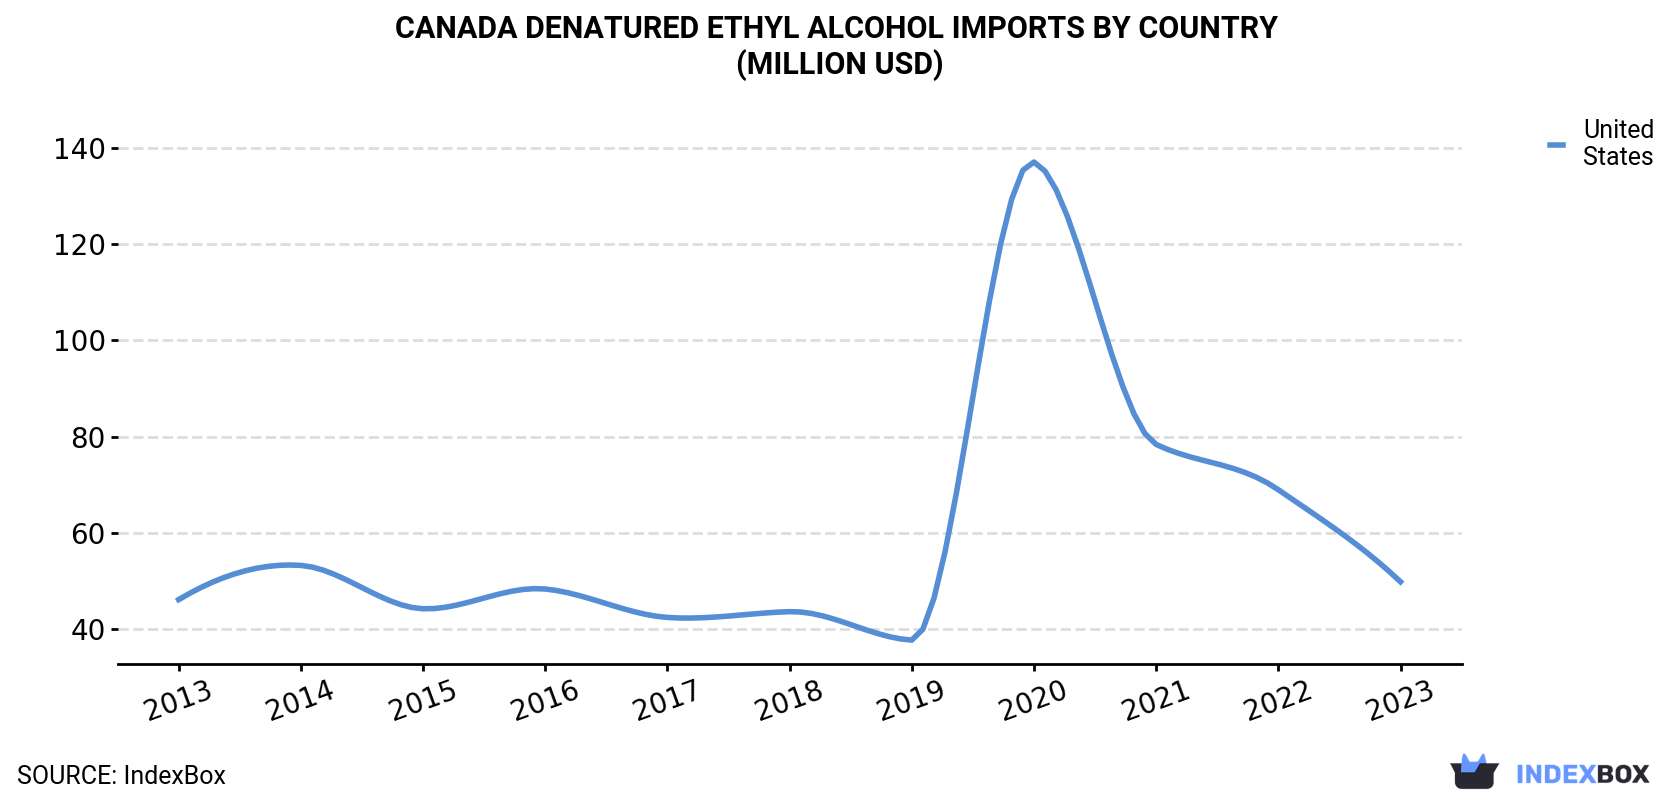 Canada Denatured Ethyl Alcohol Imports By Country (Million USD)